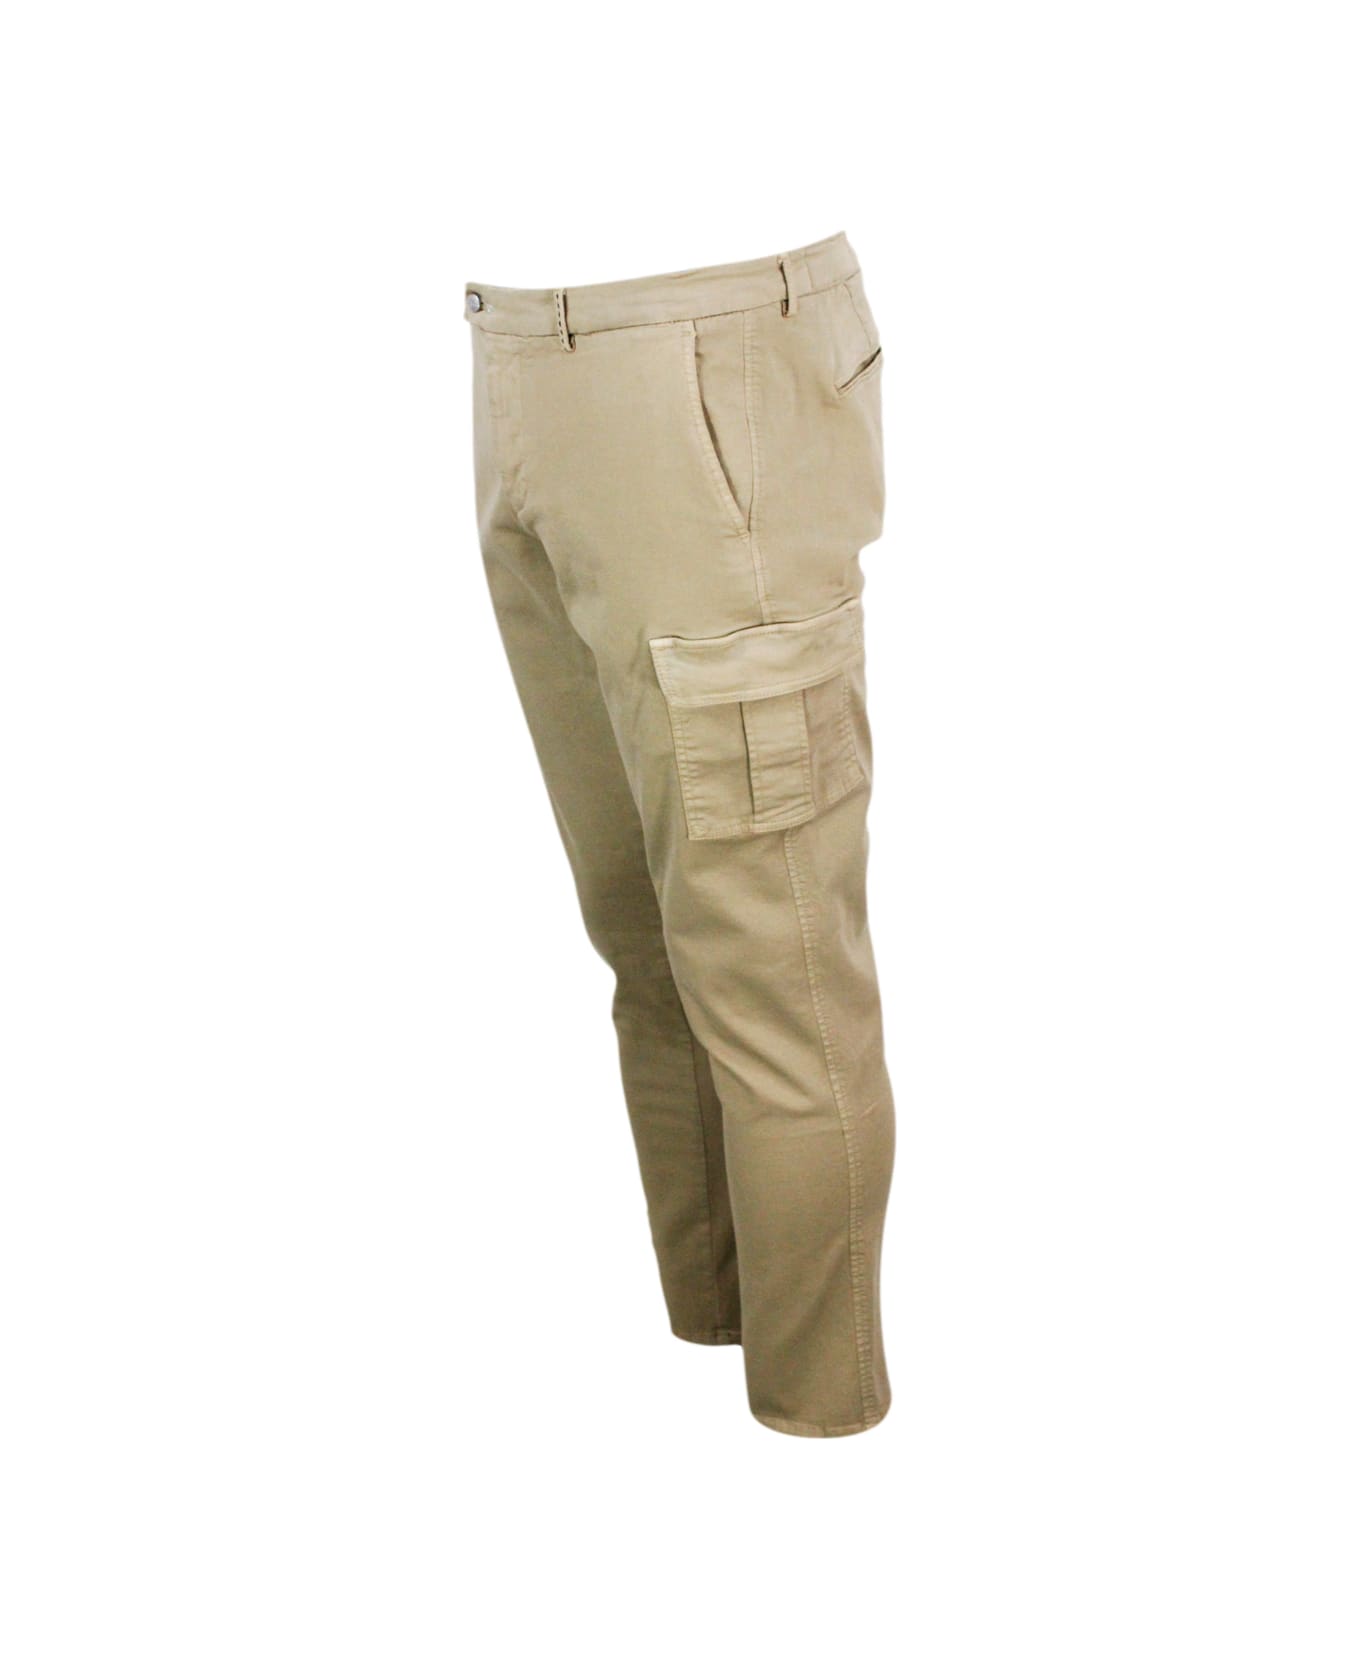 Sartoria Tramarossa Amerigo Acargo Model Trousers With Large Slim Zip Pockets In Soft Cotton With Chino Pockets And Tailored Stitching And Suede Tassel. Zip And Button Cl - Beige